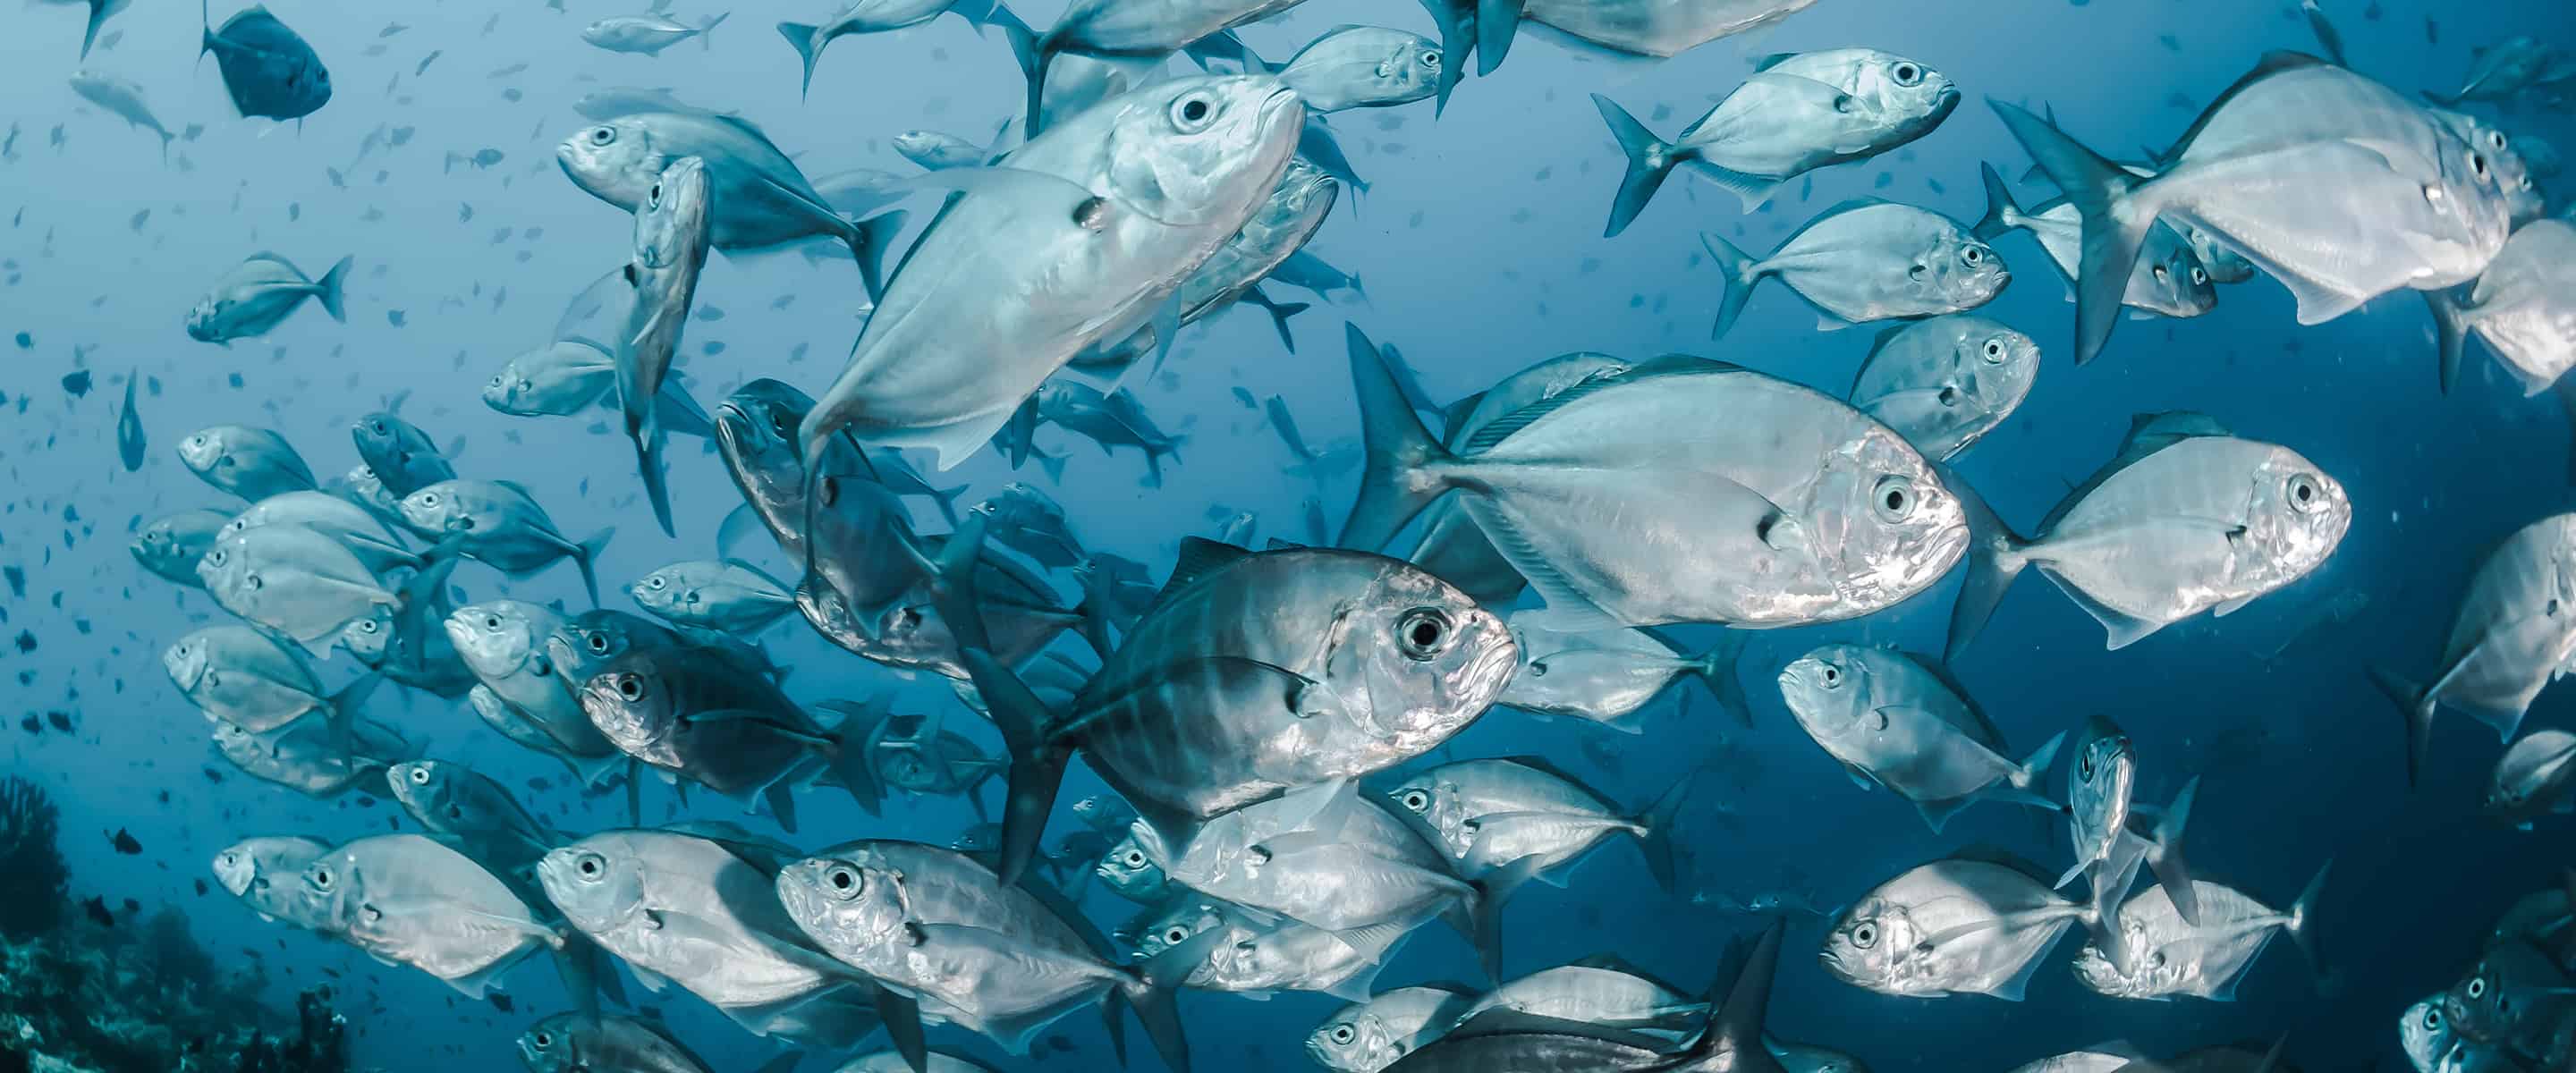 A school of fish swimming in the ocean.